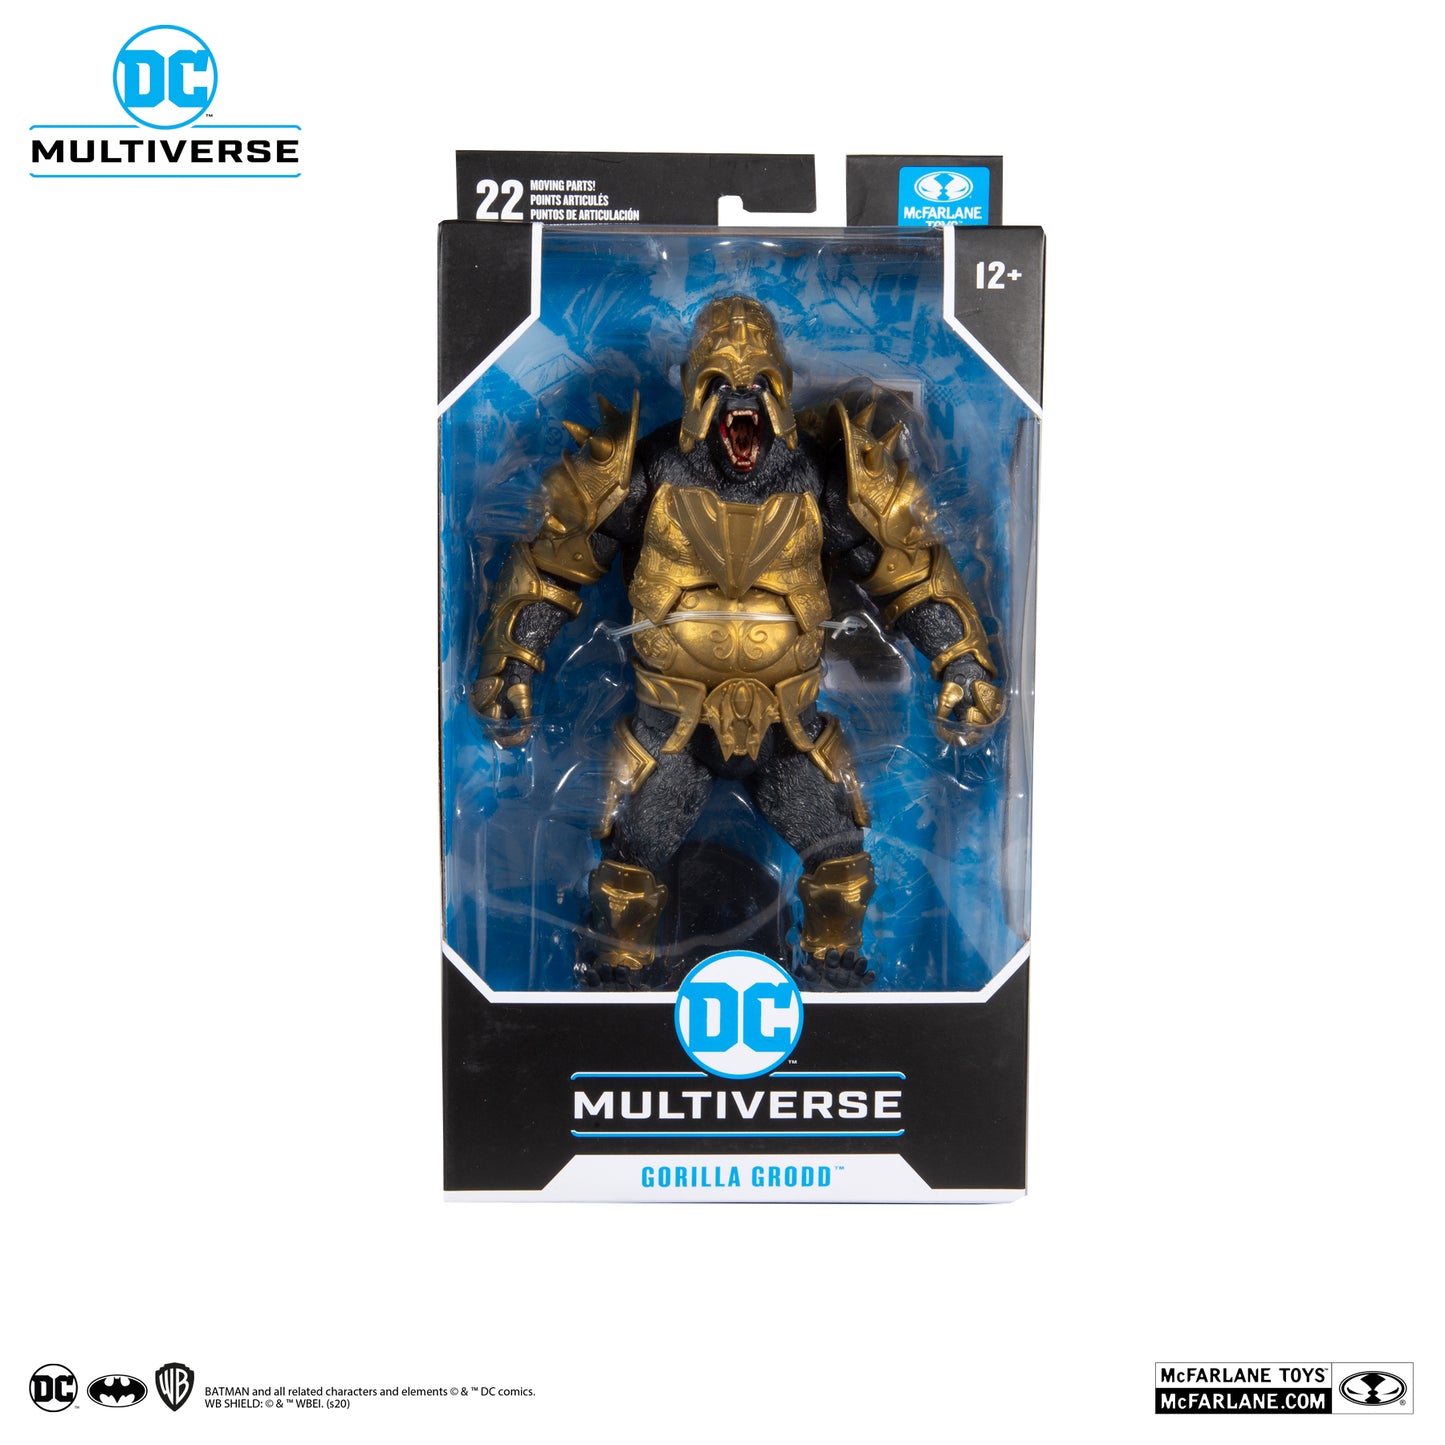 DC Multiverse Injustice 2 Gorilla Grodd Action Figure - Action Figure - The Hooded Goblin